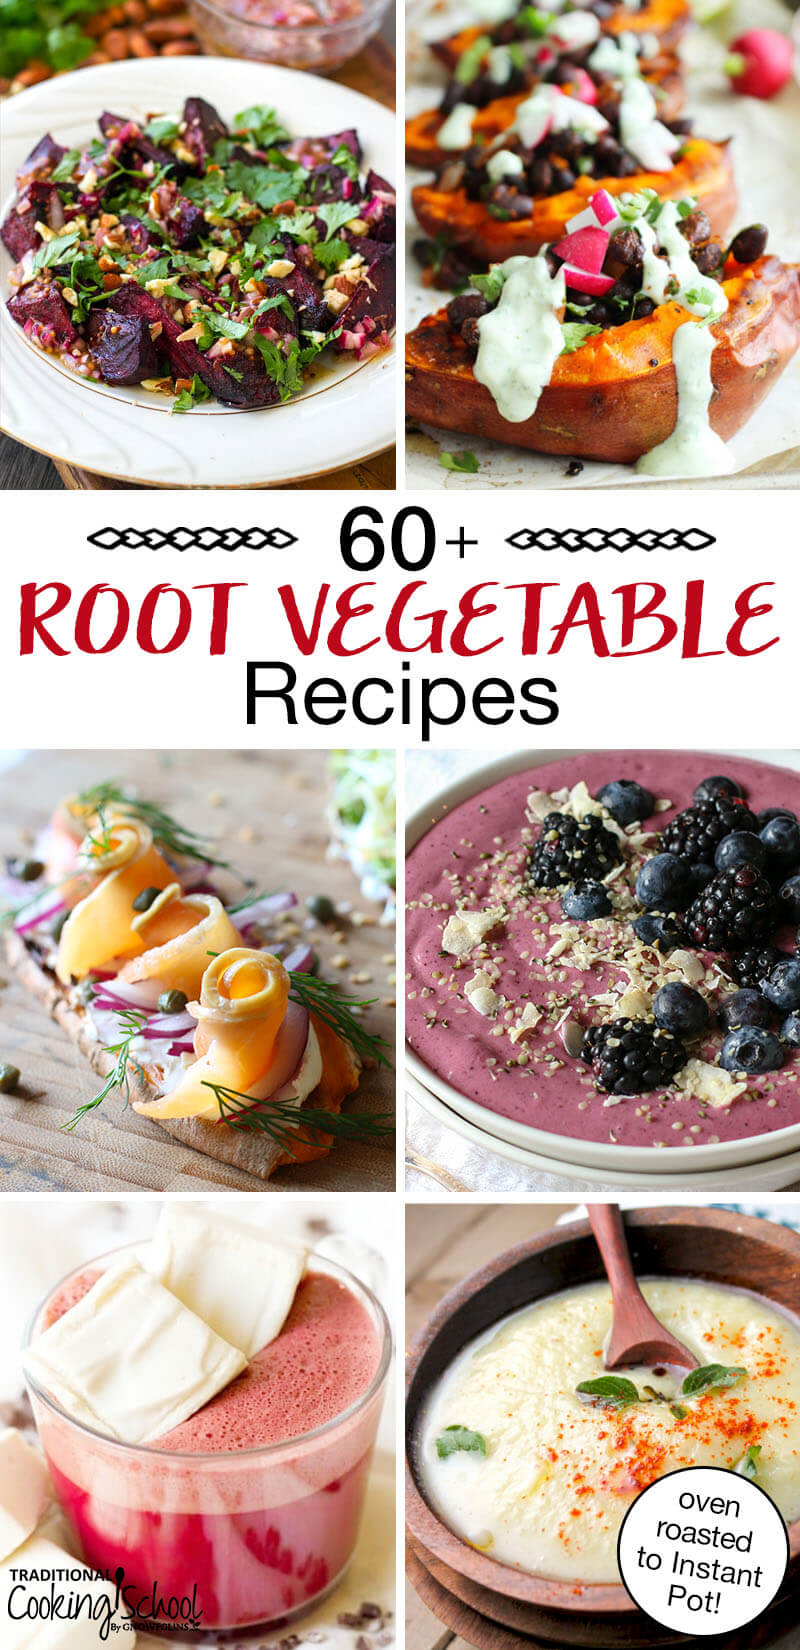 photo collage of beet hot chocolate, loaded sweet potatoes, beet smoothie bowls, and more, with text overlay: "60+ Root Vegetable Recipes (from oven roasted to Instant Pot!)"